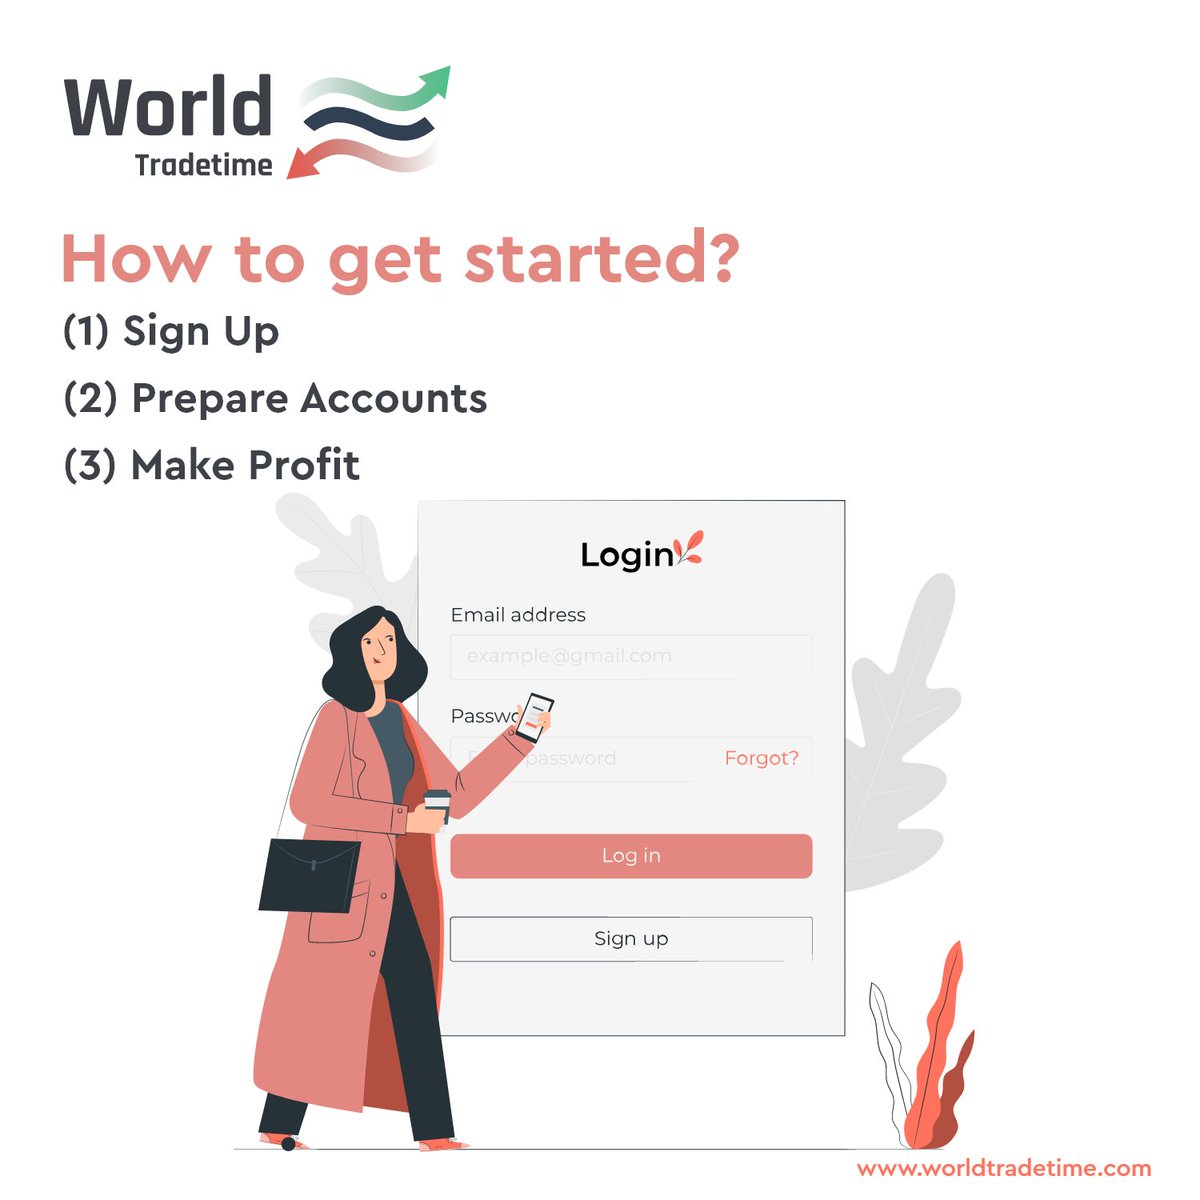 Want to Know How to get started? visit at : worldtradetime.com  #worldtradetime #trading #cryptotrading #forextrading #profitsharing #safealgorithms #safe #bottrading #Automatetrade #cryptocurrency #Worldtrade #farming #investment